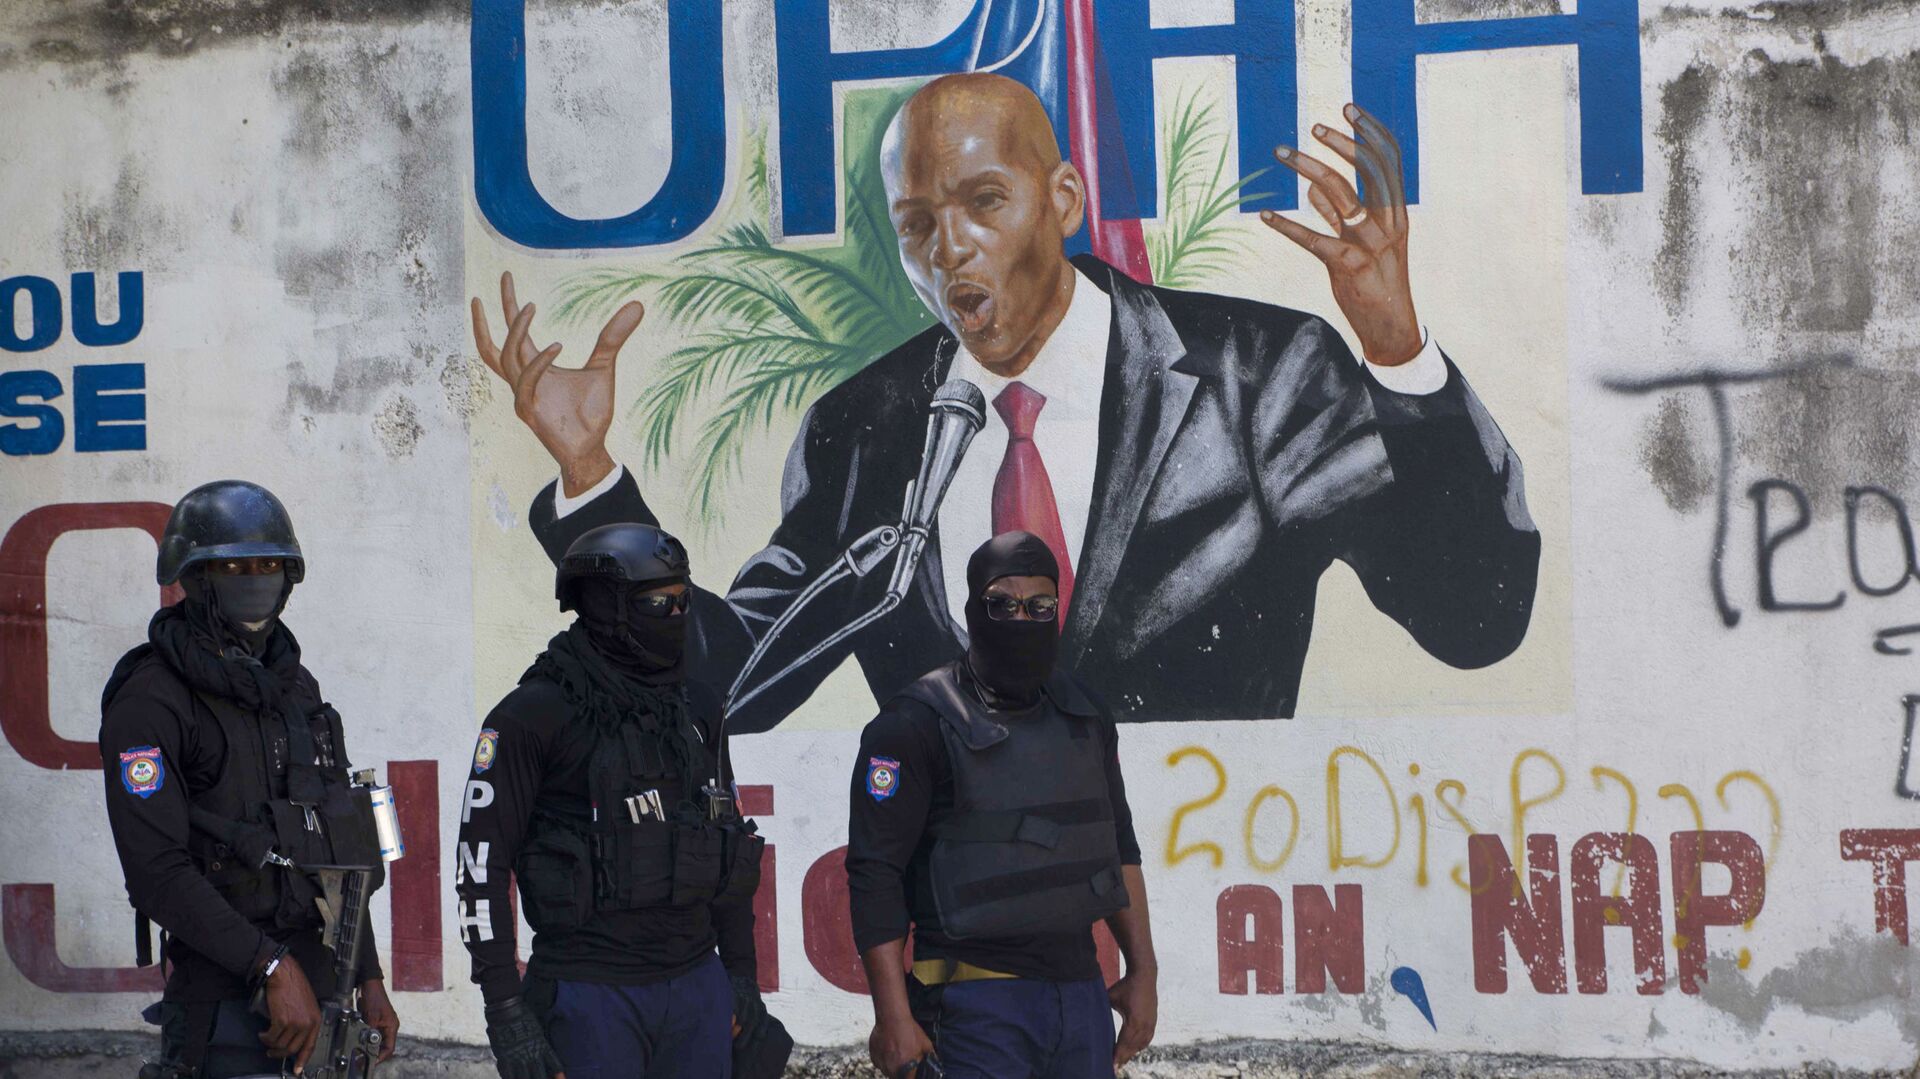 Police stand near a mural featuring Haitian President Jovenel Moise, near the leader’s residence where he was killed by gunmen in the early morning hours in Port-au-Prince, Haiti, Wednesday, July 7, 2021. - Sputnik International, 1920, 07.07.2021